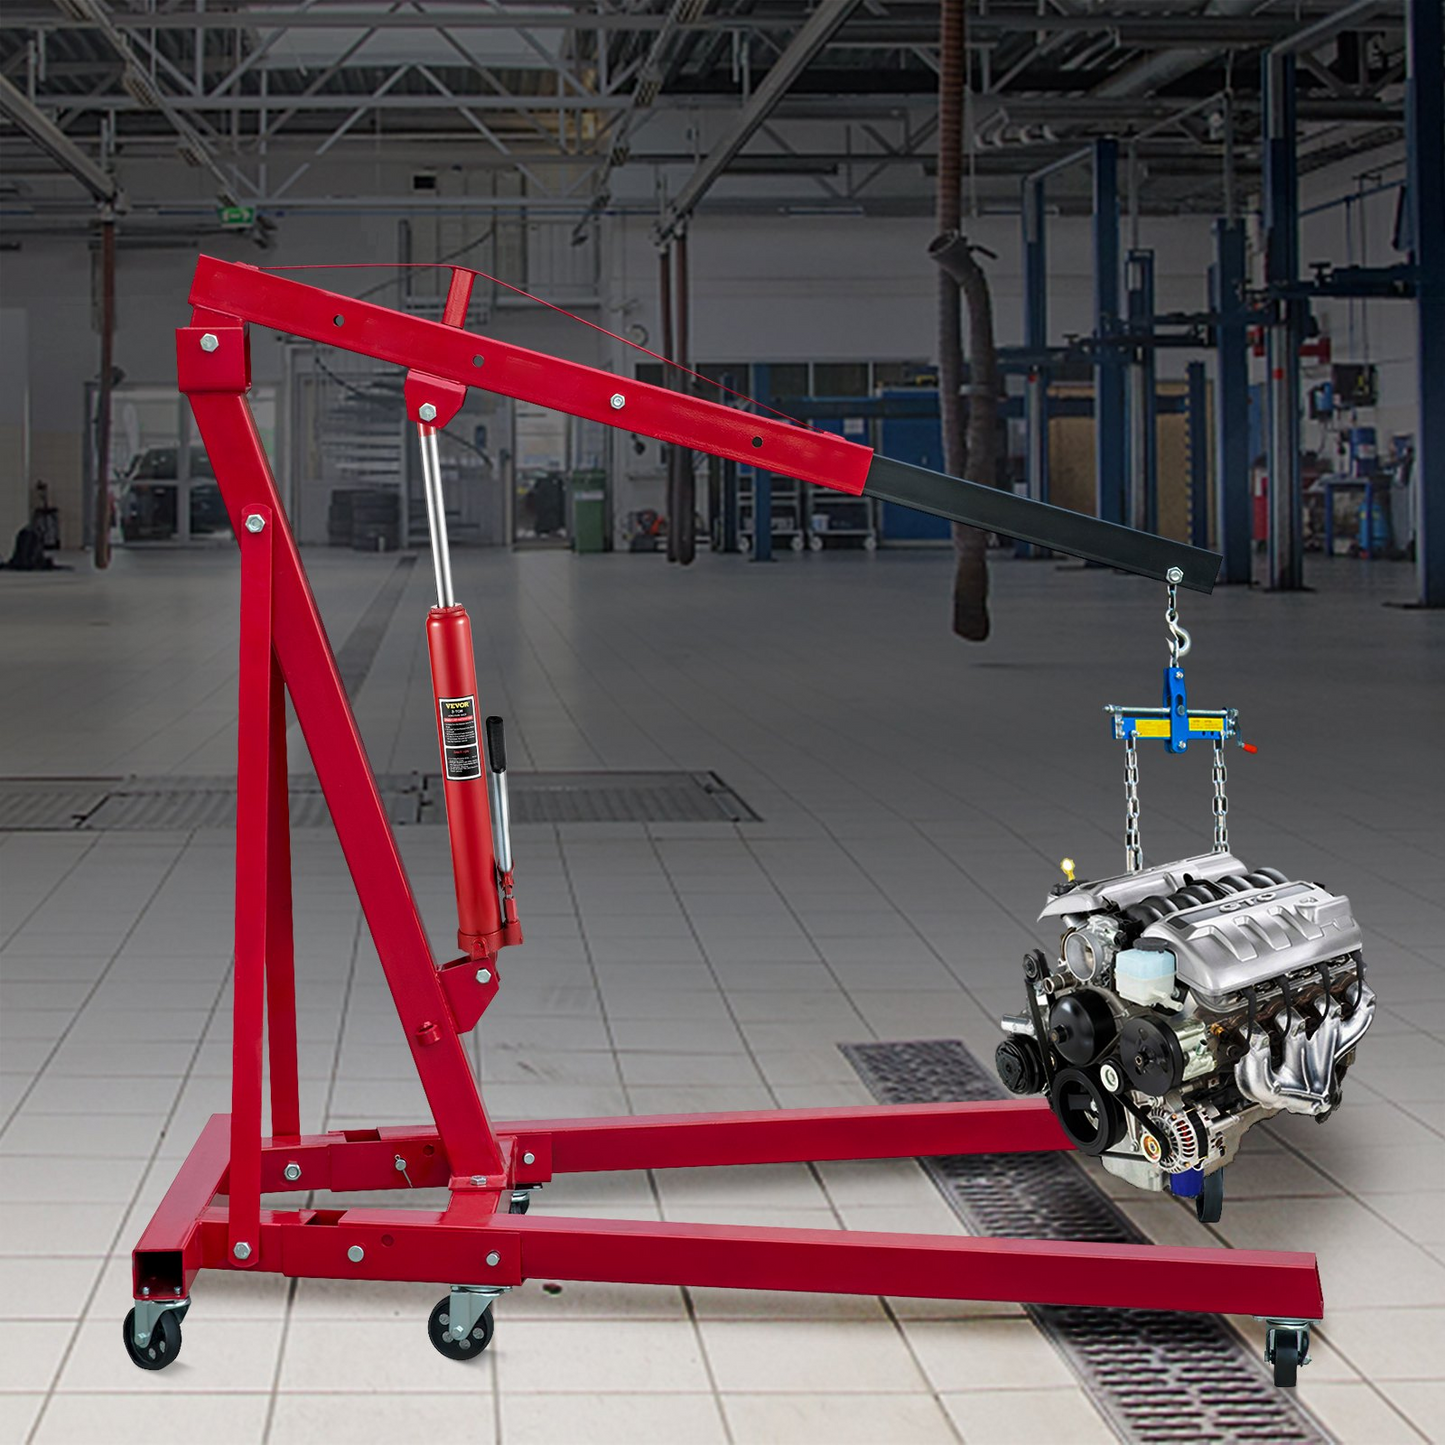 VEVOR Hydraulic Long Ram Jack, 3 Tons/6600 lbs Capacity, with Single Piston Pump and Clevis Base, Manual Cherry Picker w/Handle, for Garage/Shop Cranes, Engine Lift Hoist, Red, Goodies N Stuff